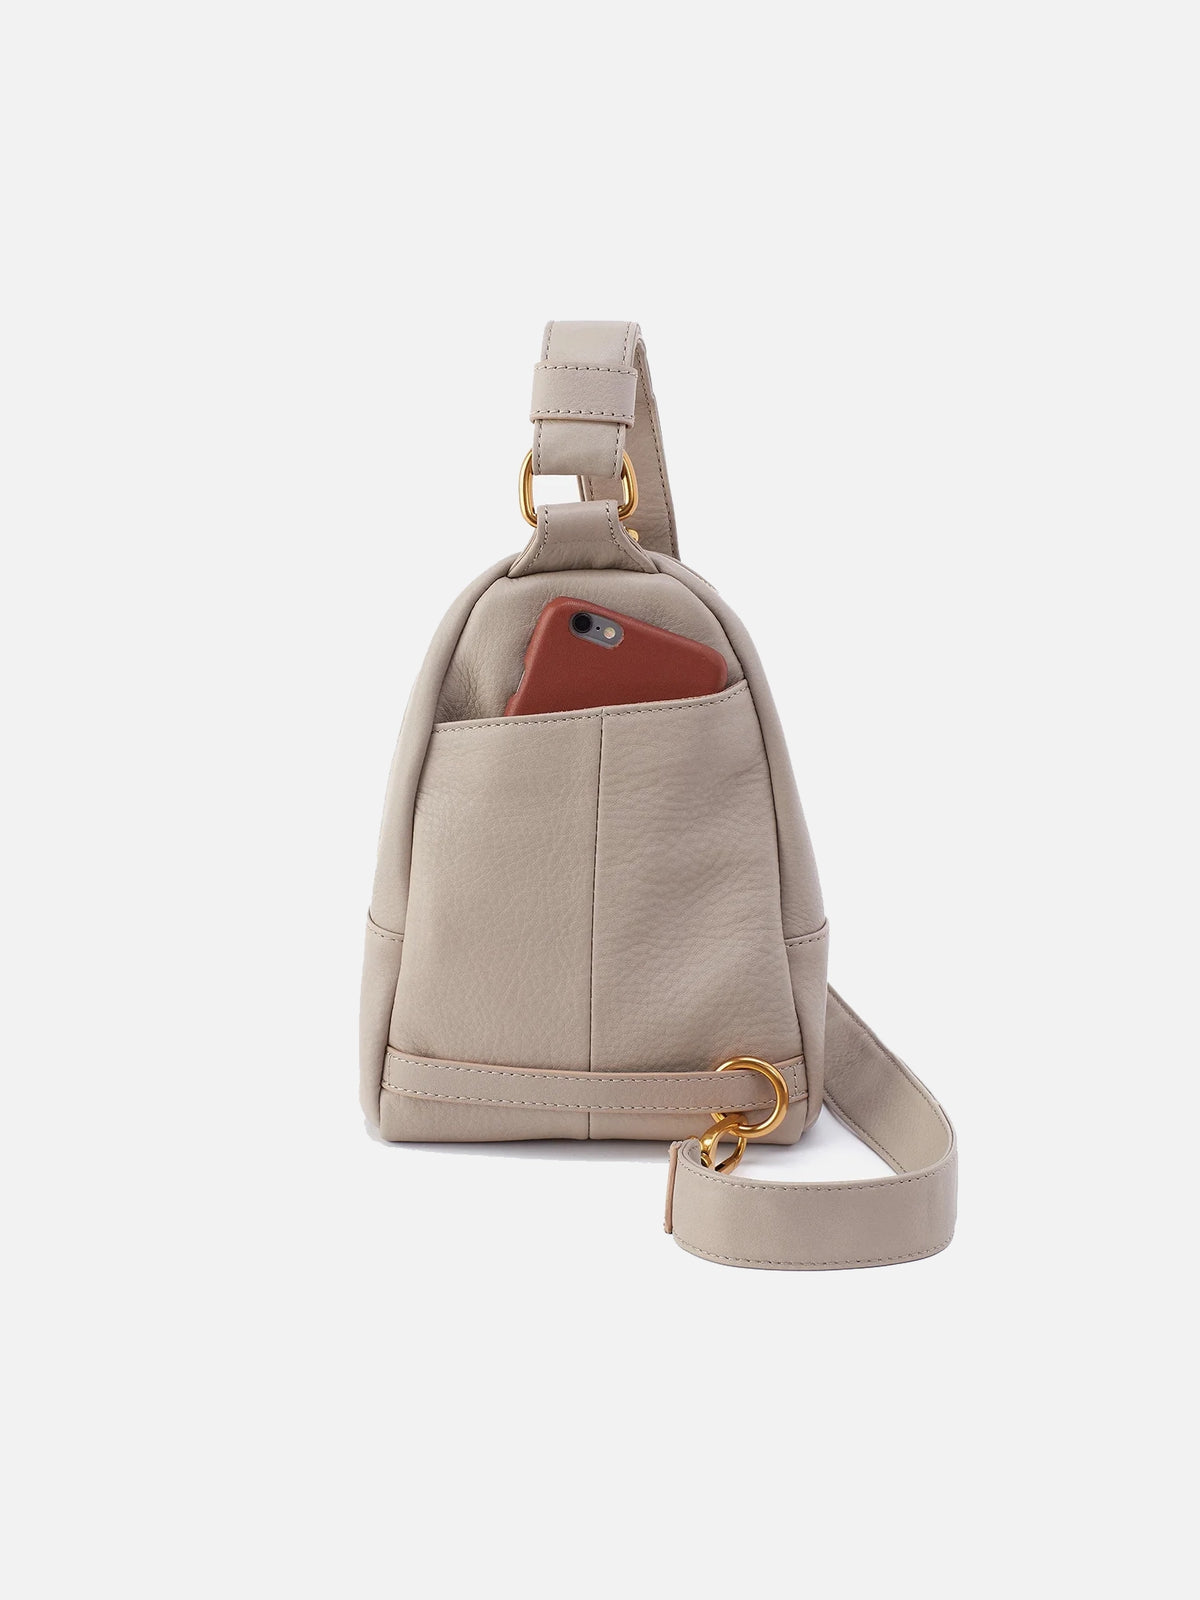 hobo fern sling bag in taupe pebbled leather